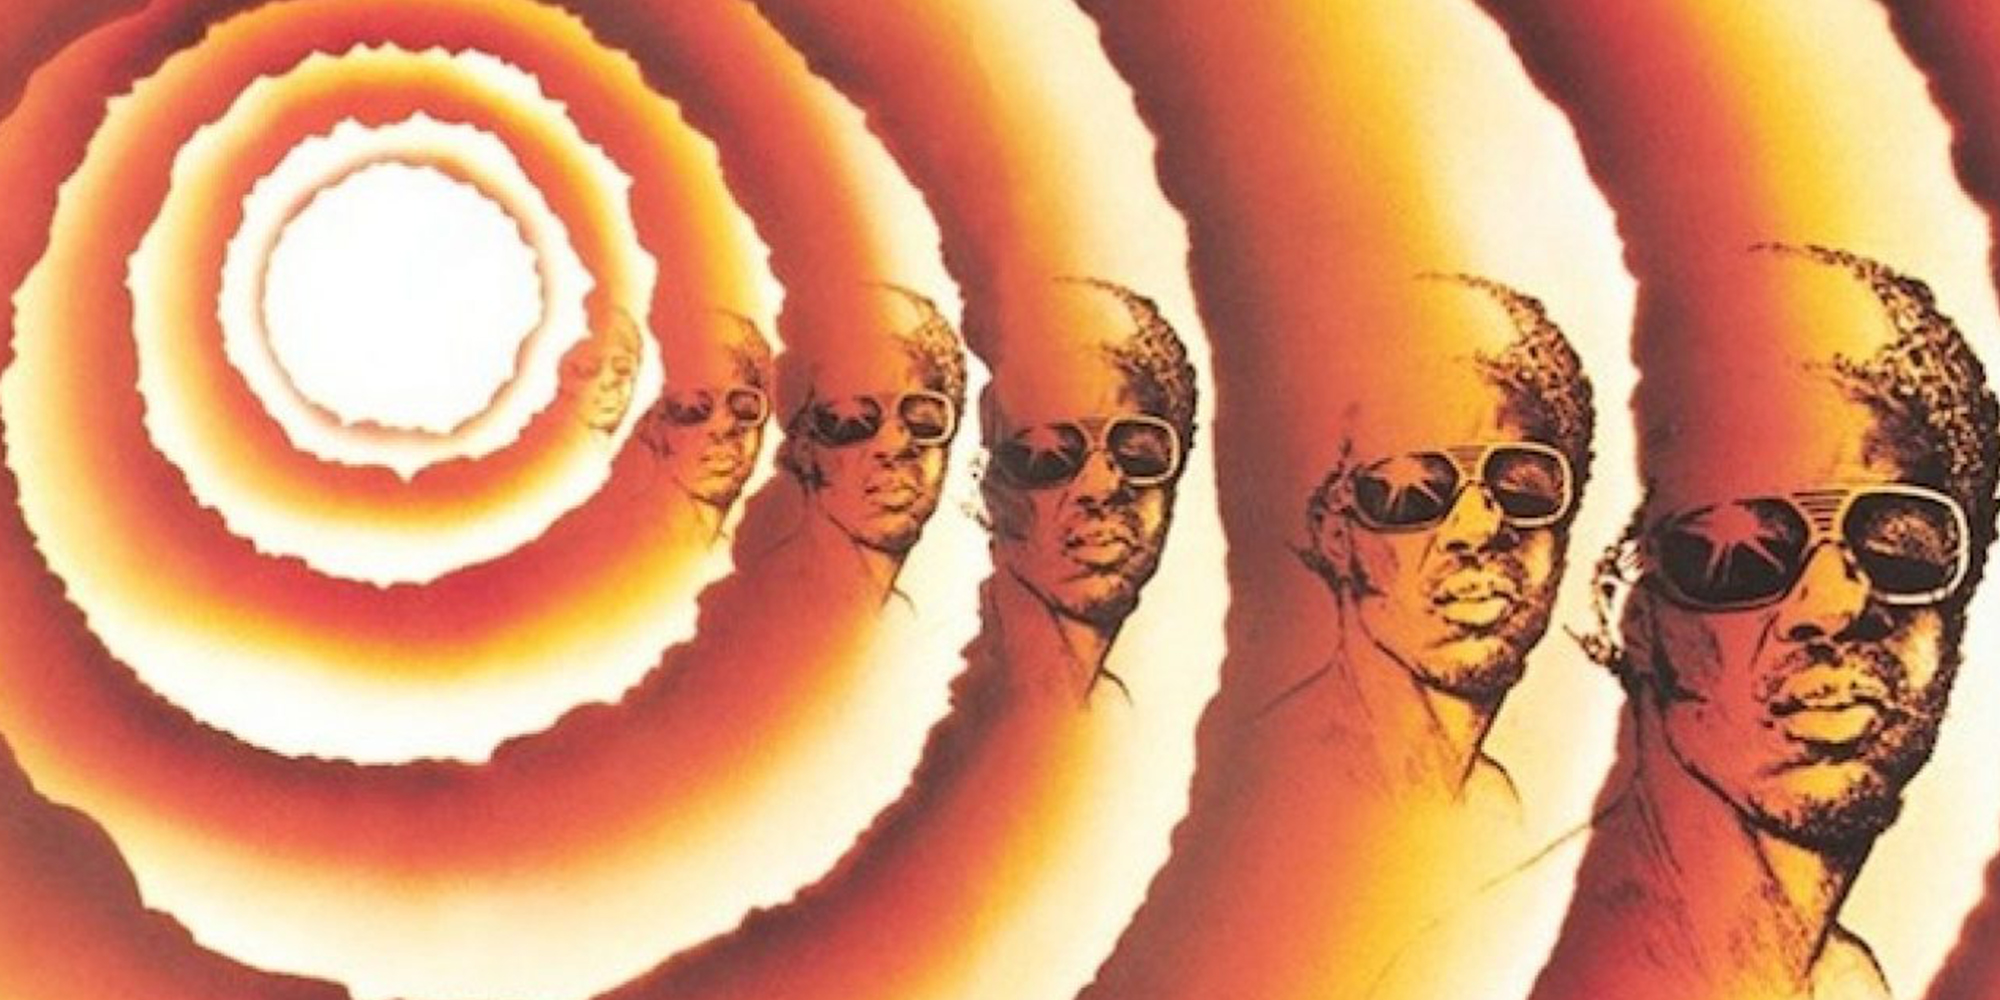 The psychedelic soul of Stevie Wonder’s cover artwork